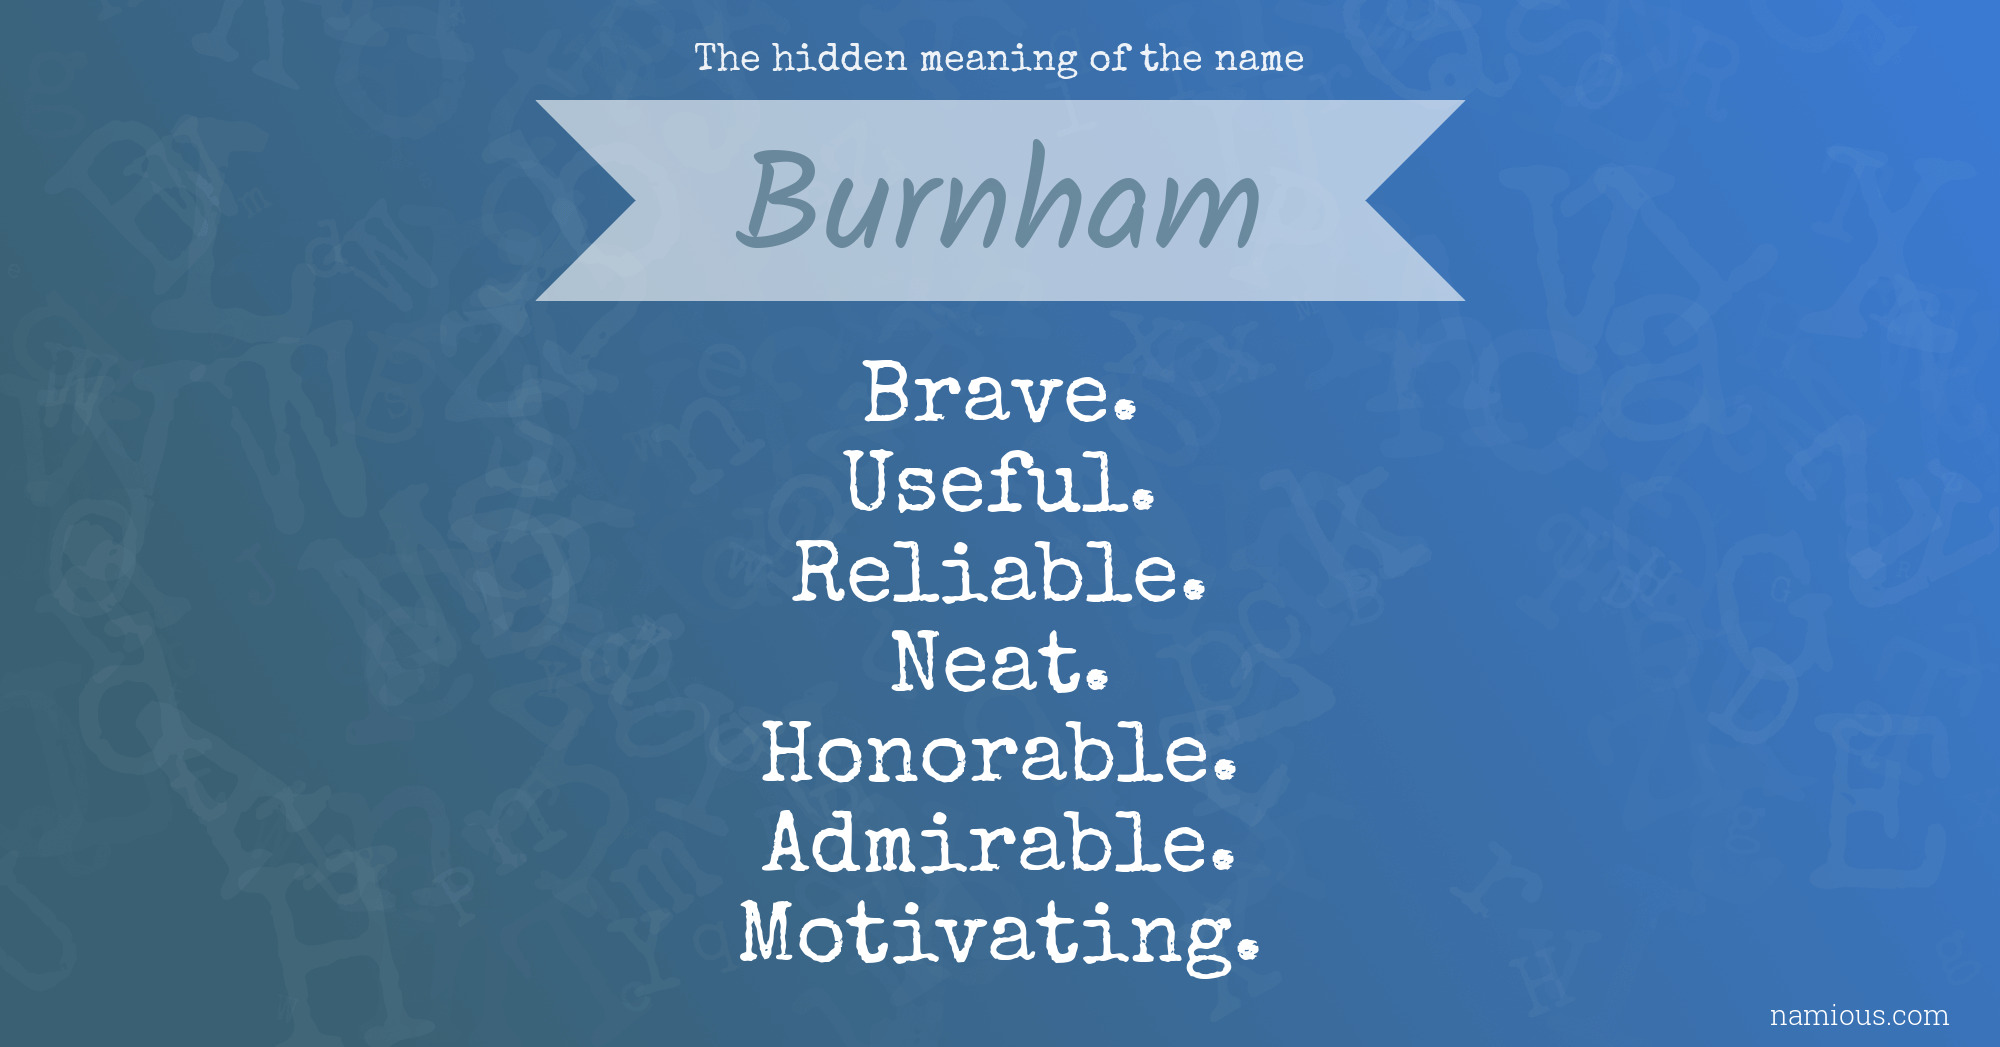 The hidden meaning of the name Burnham